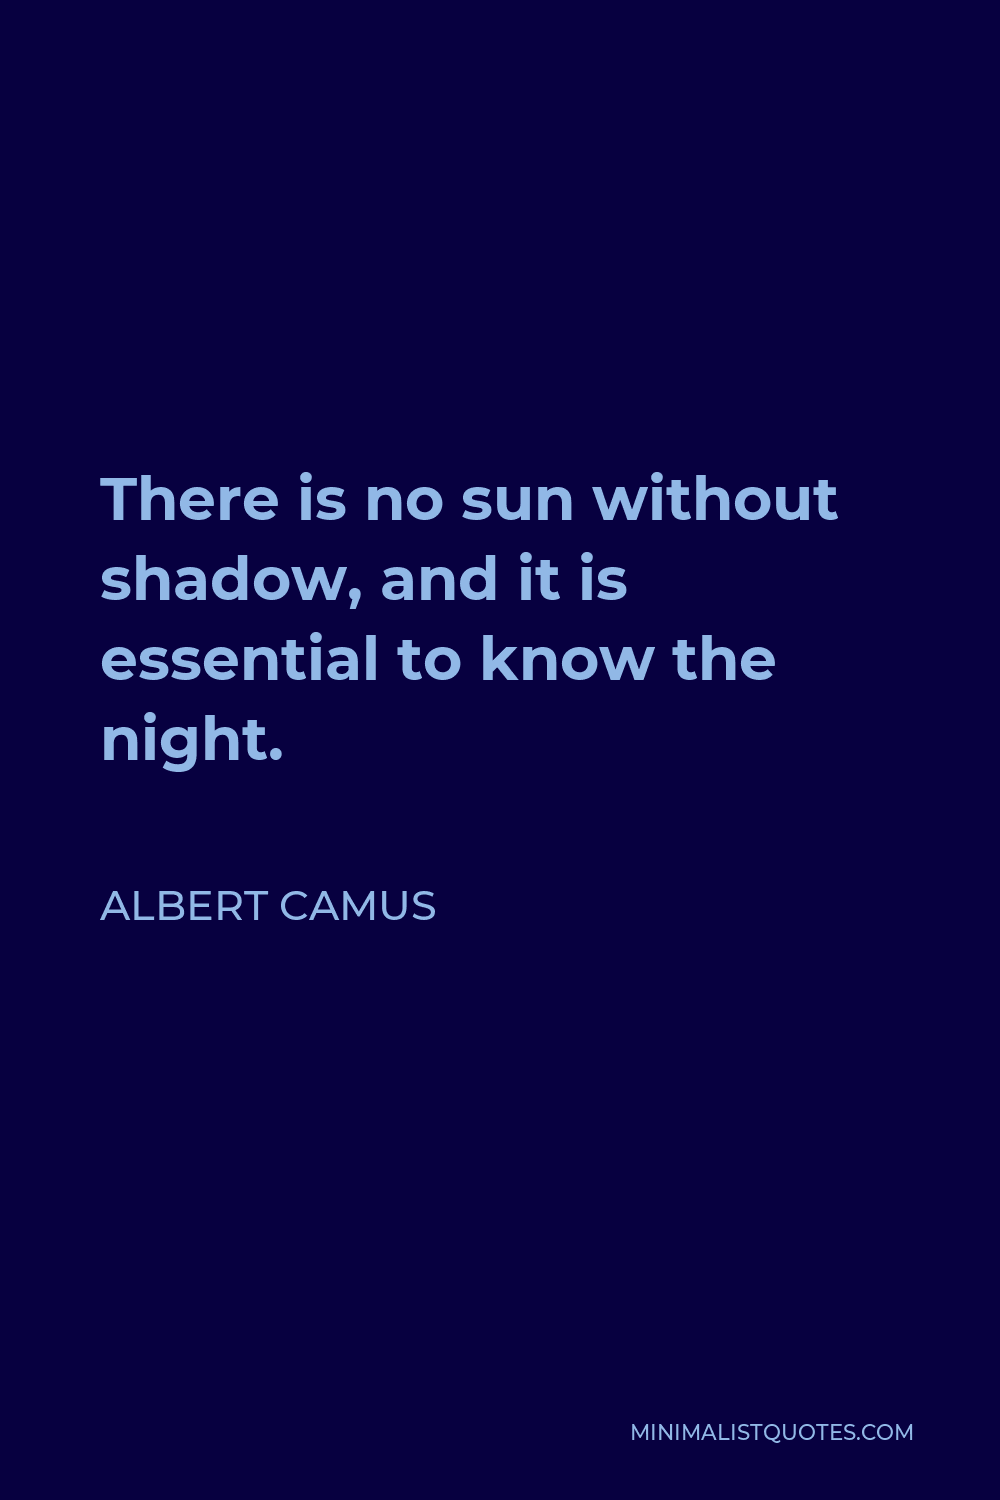 Albert Camus Quote - There is no sun without shadow, and it is essential to know the night.